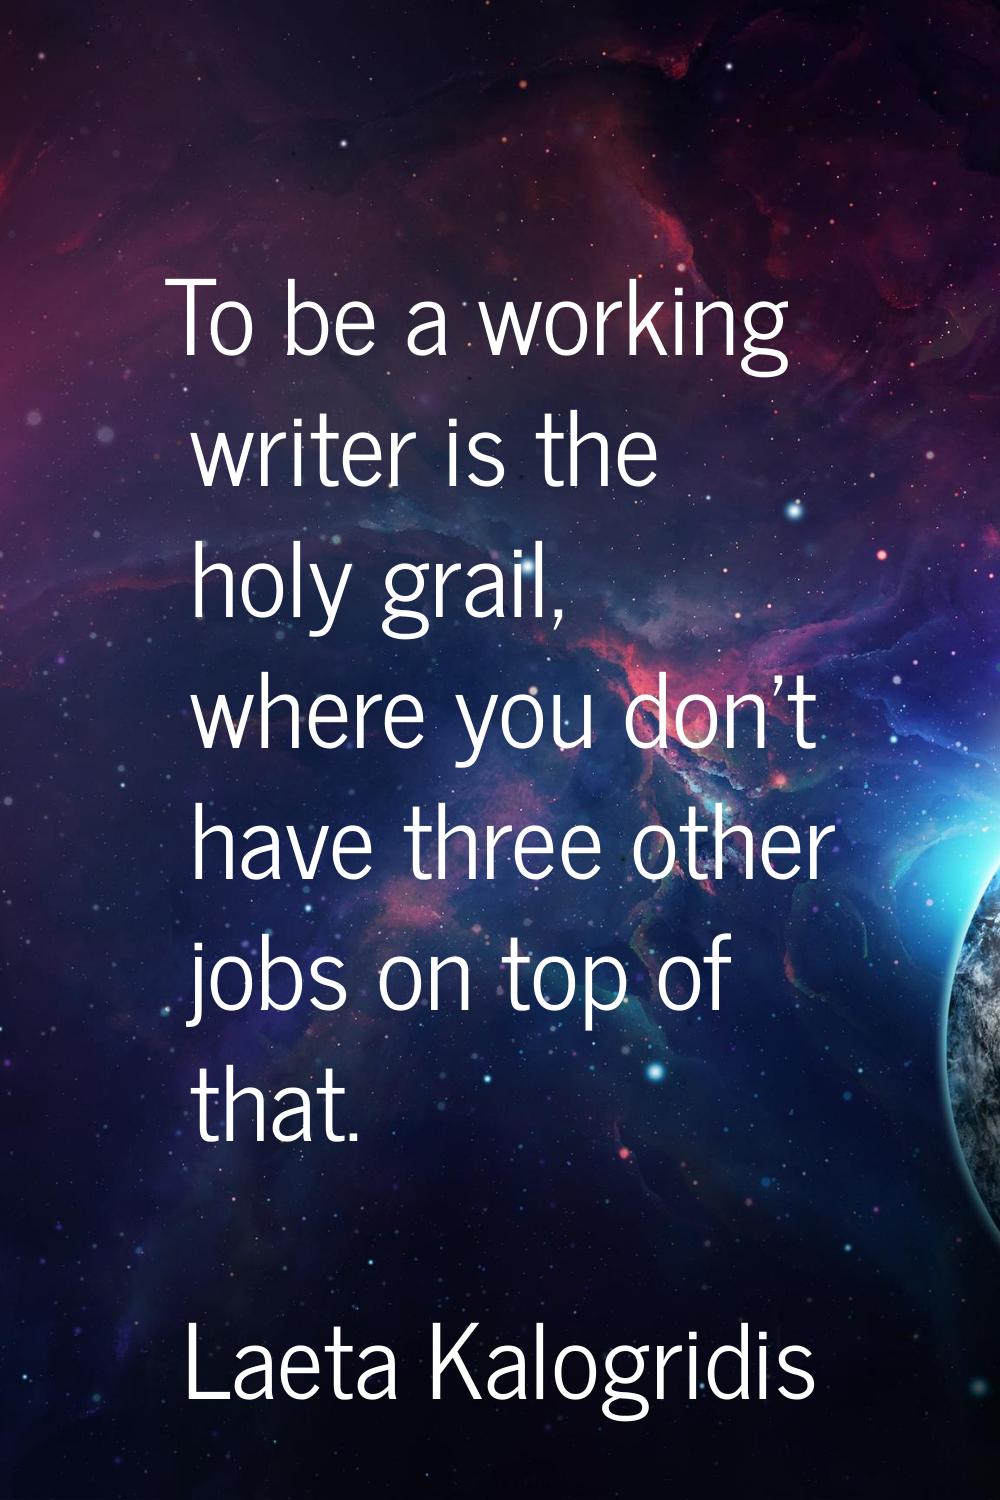 To be a working writer is the holy grail, where you don't have three other jobs on top of that.